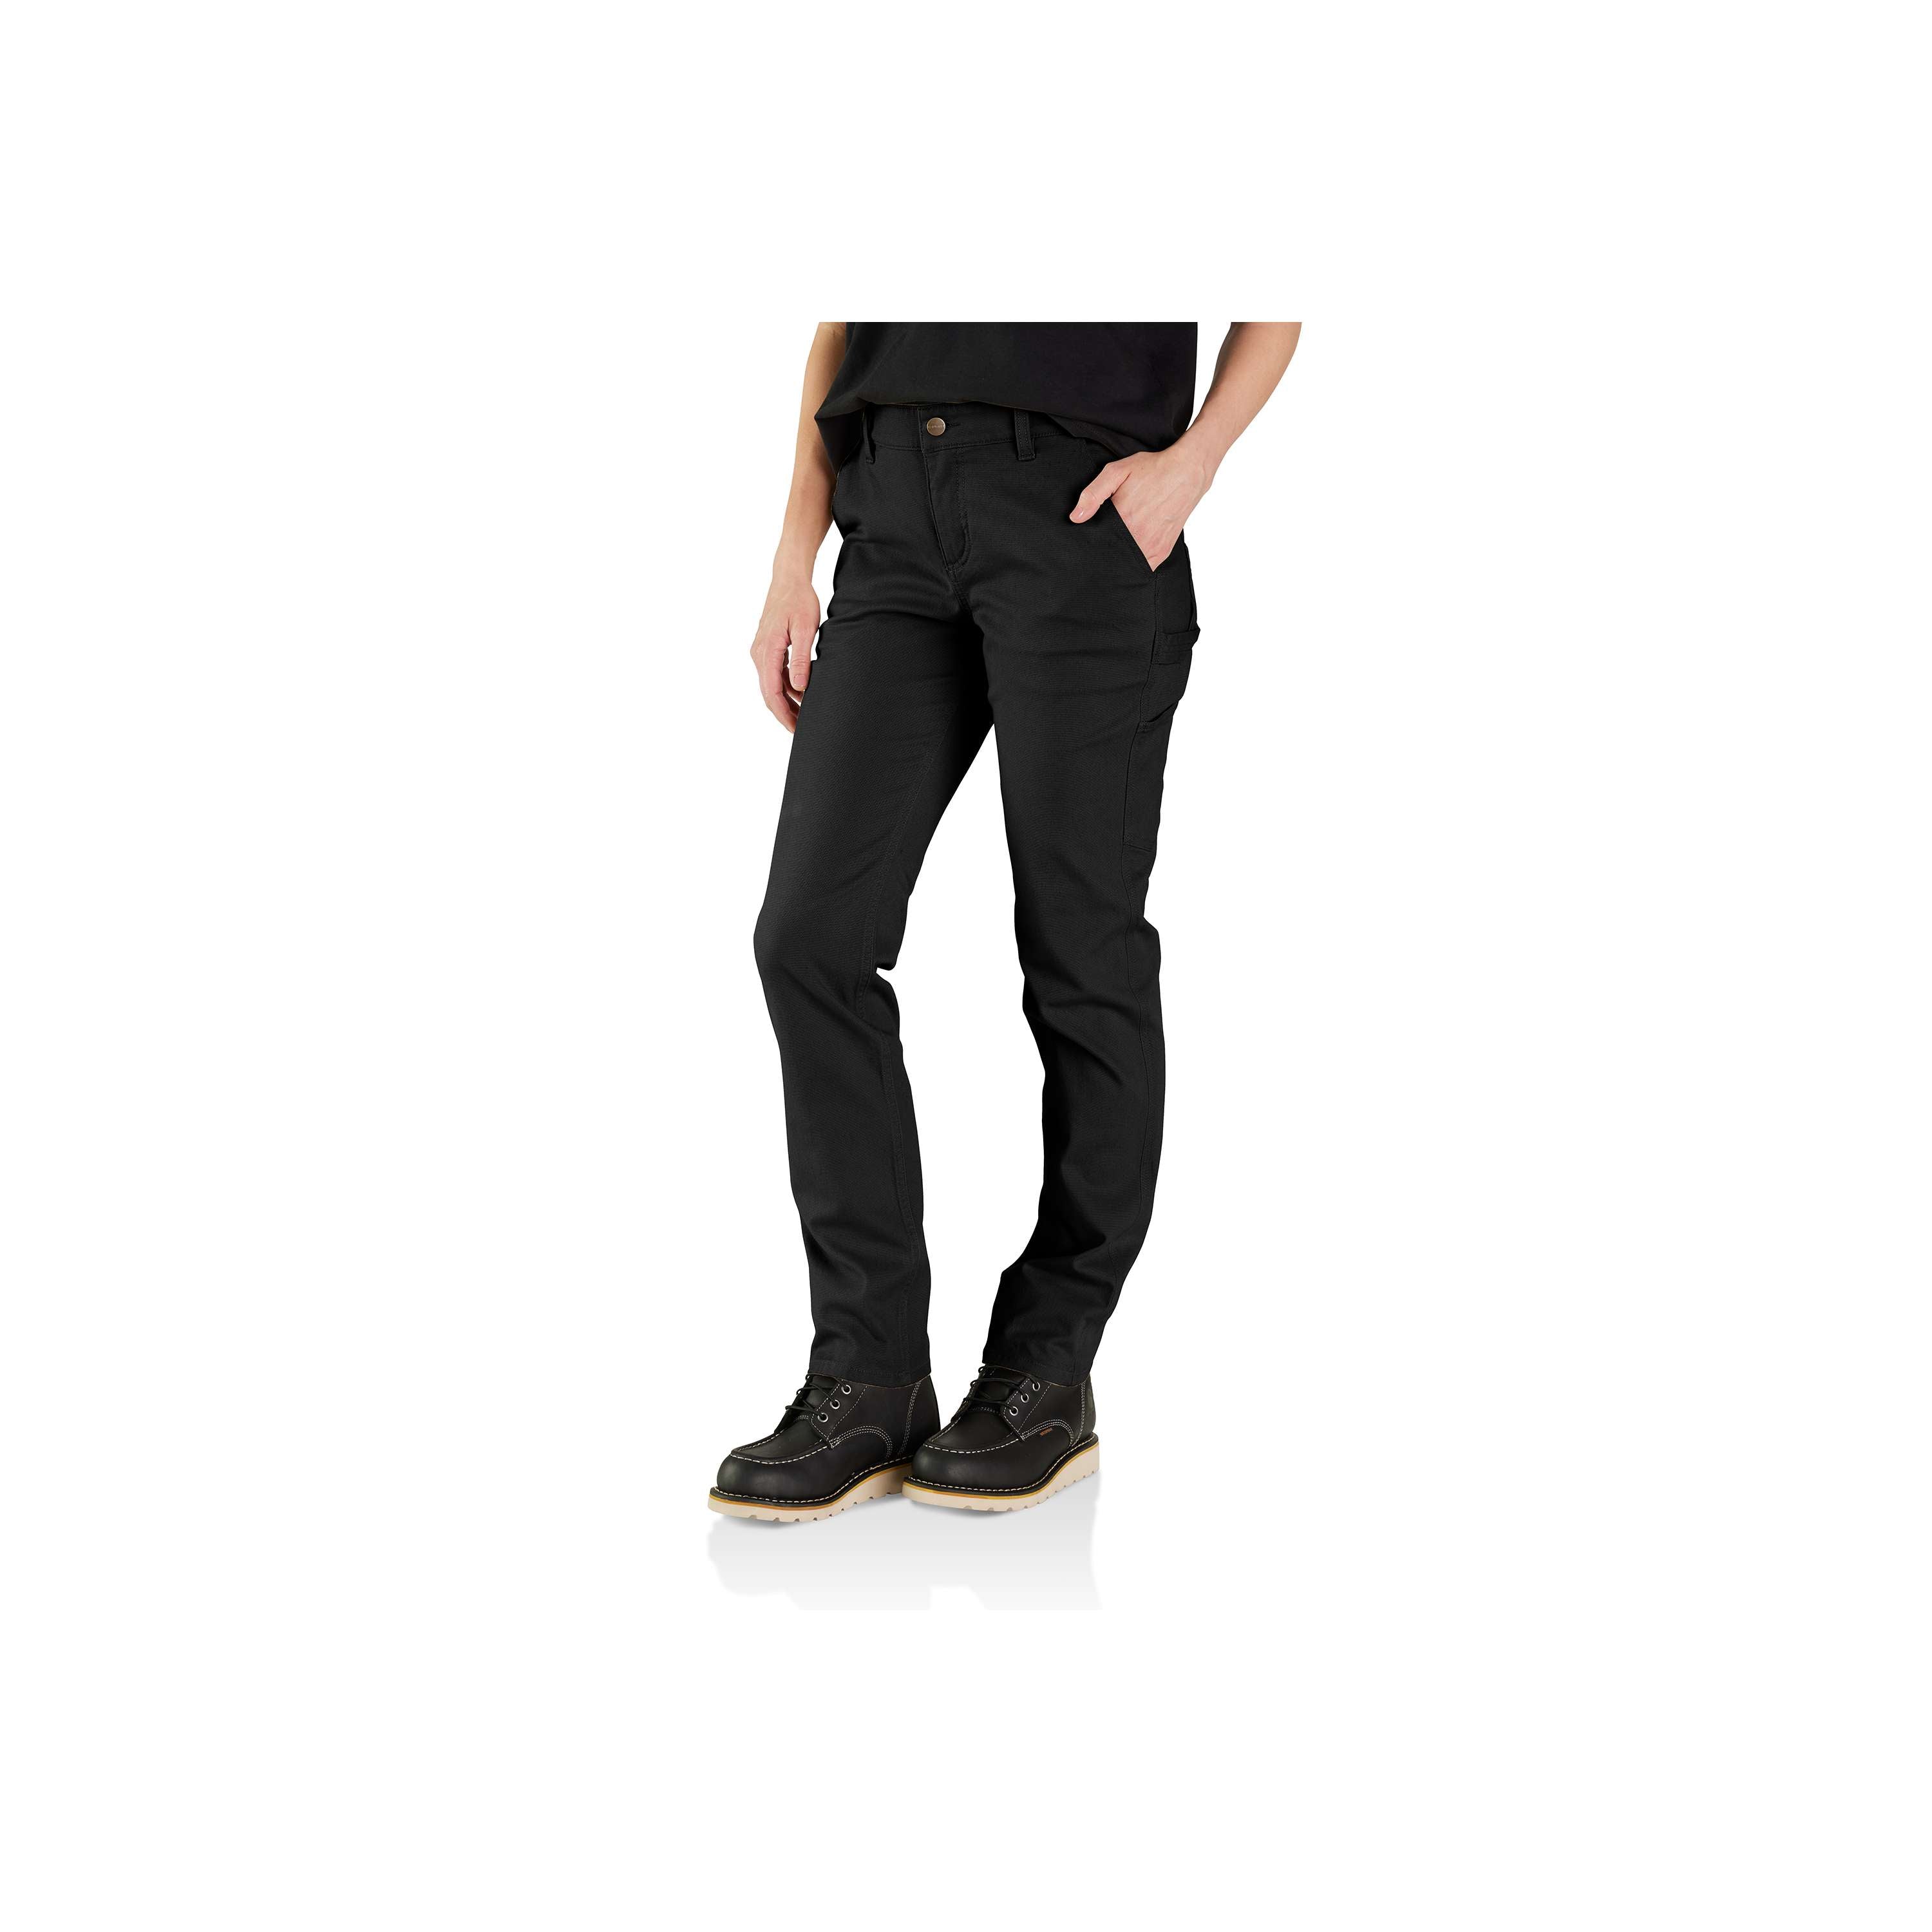 105113 - WOMEN'S RUGGED FLEX® RELAXED FIT CANVAS WORK PANT – Marshlands  Canada Factory Outlet